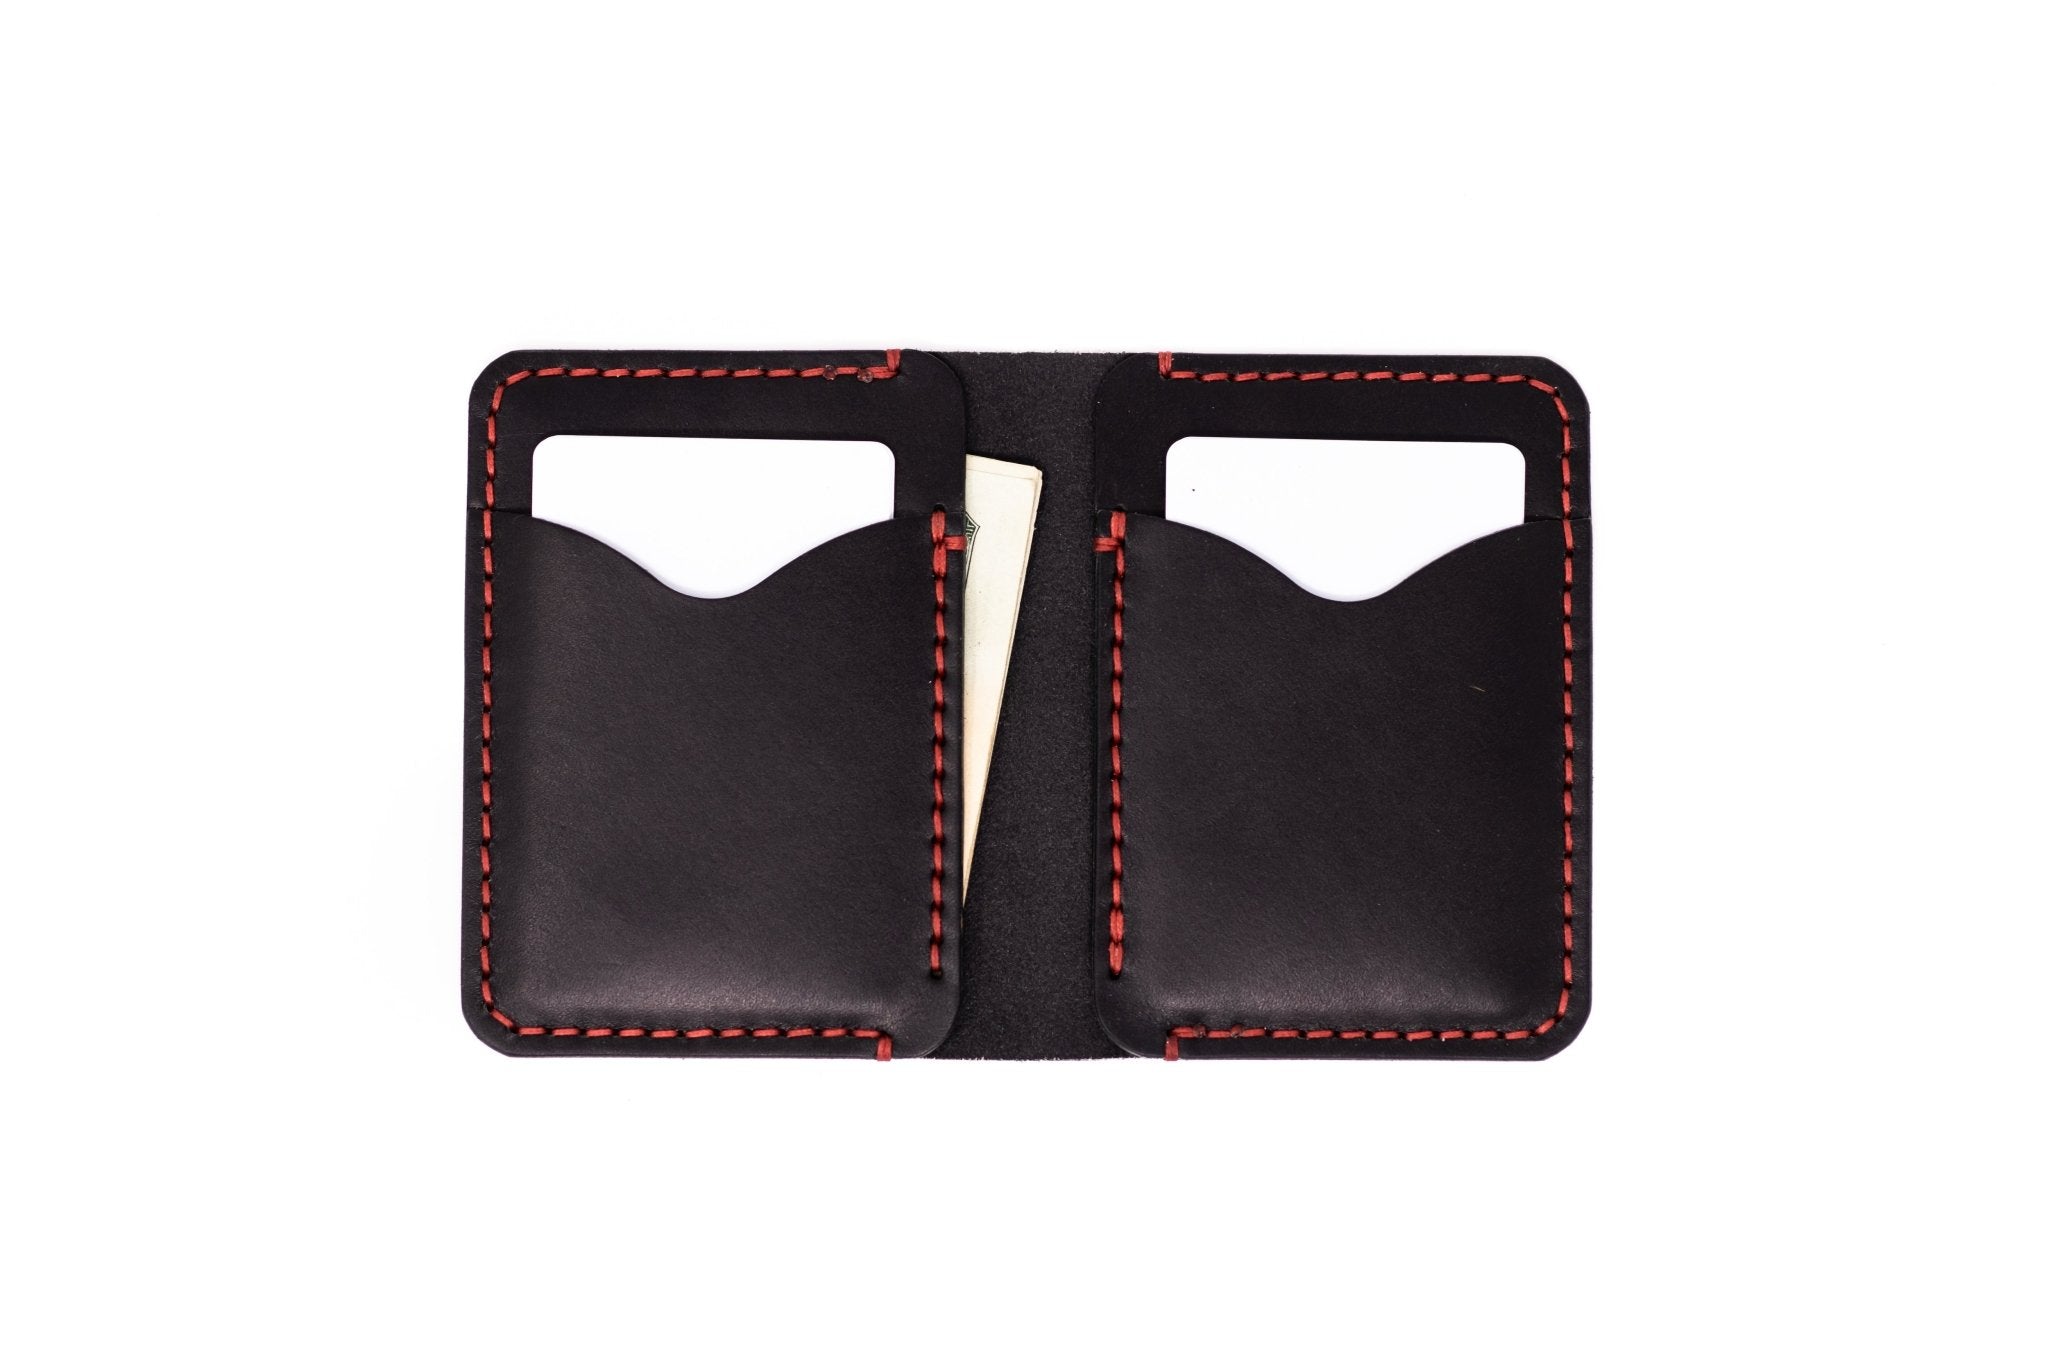 The Vertical Dutchman - Lost Dutchman Leather handmade leather wallets